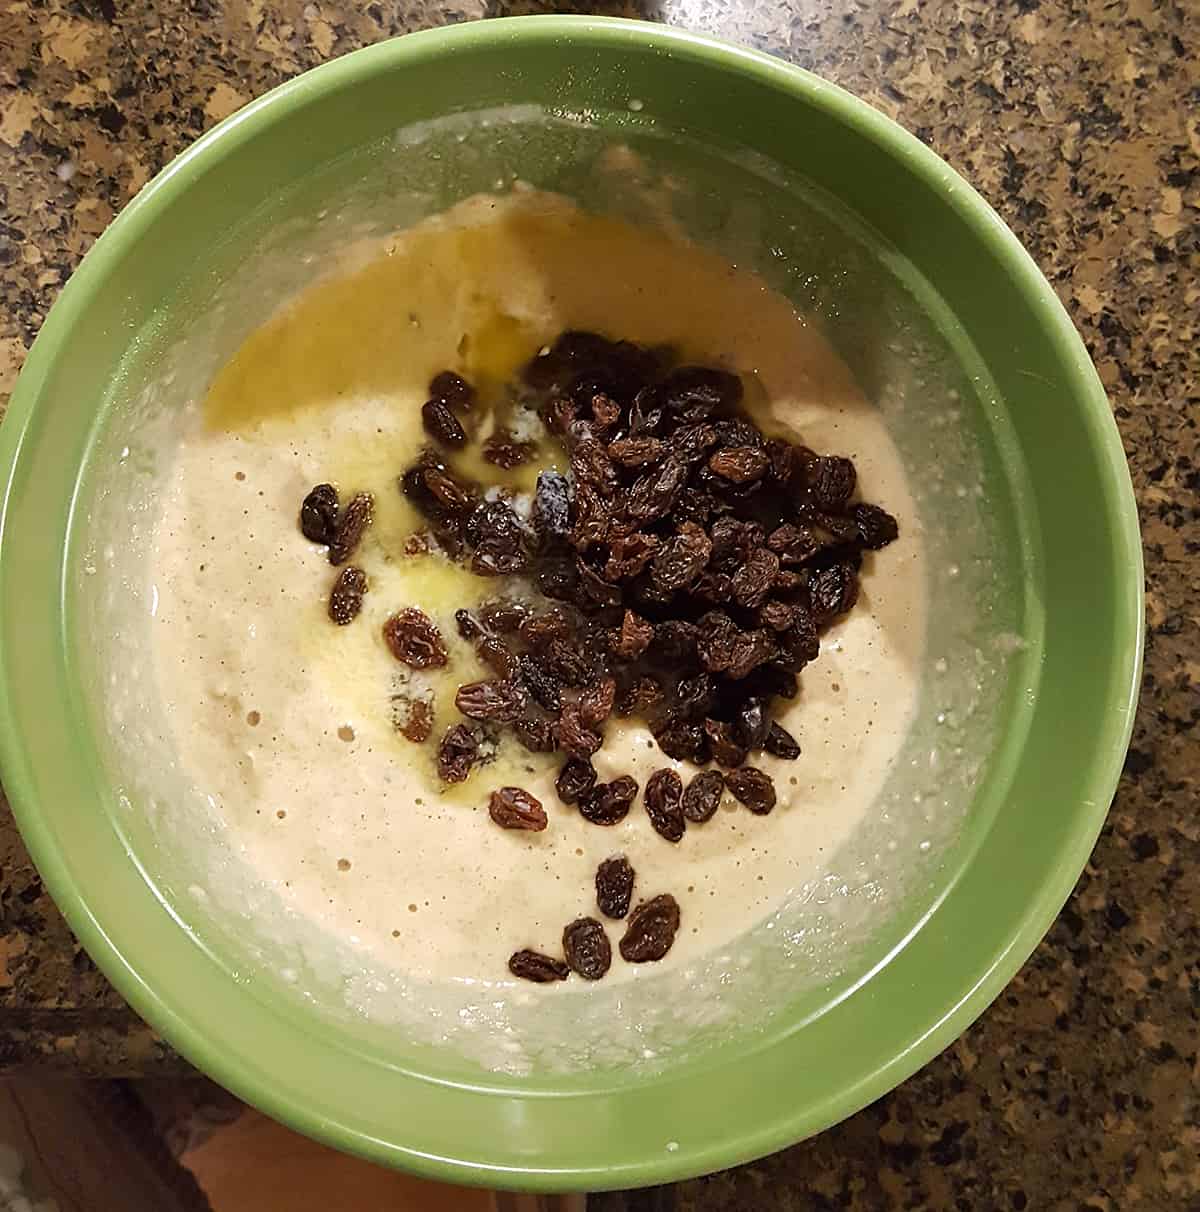 Medium bowl with batter, raisins, and melted butter.